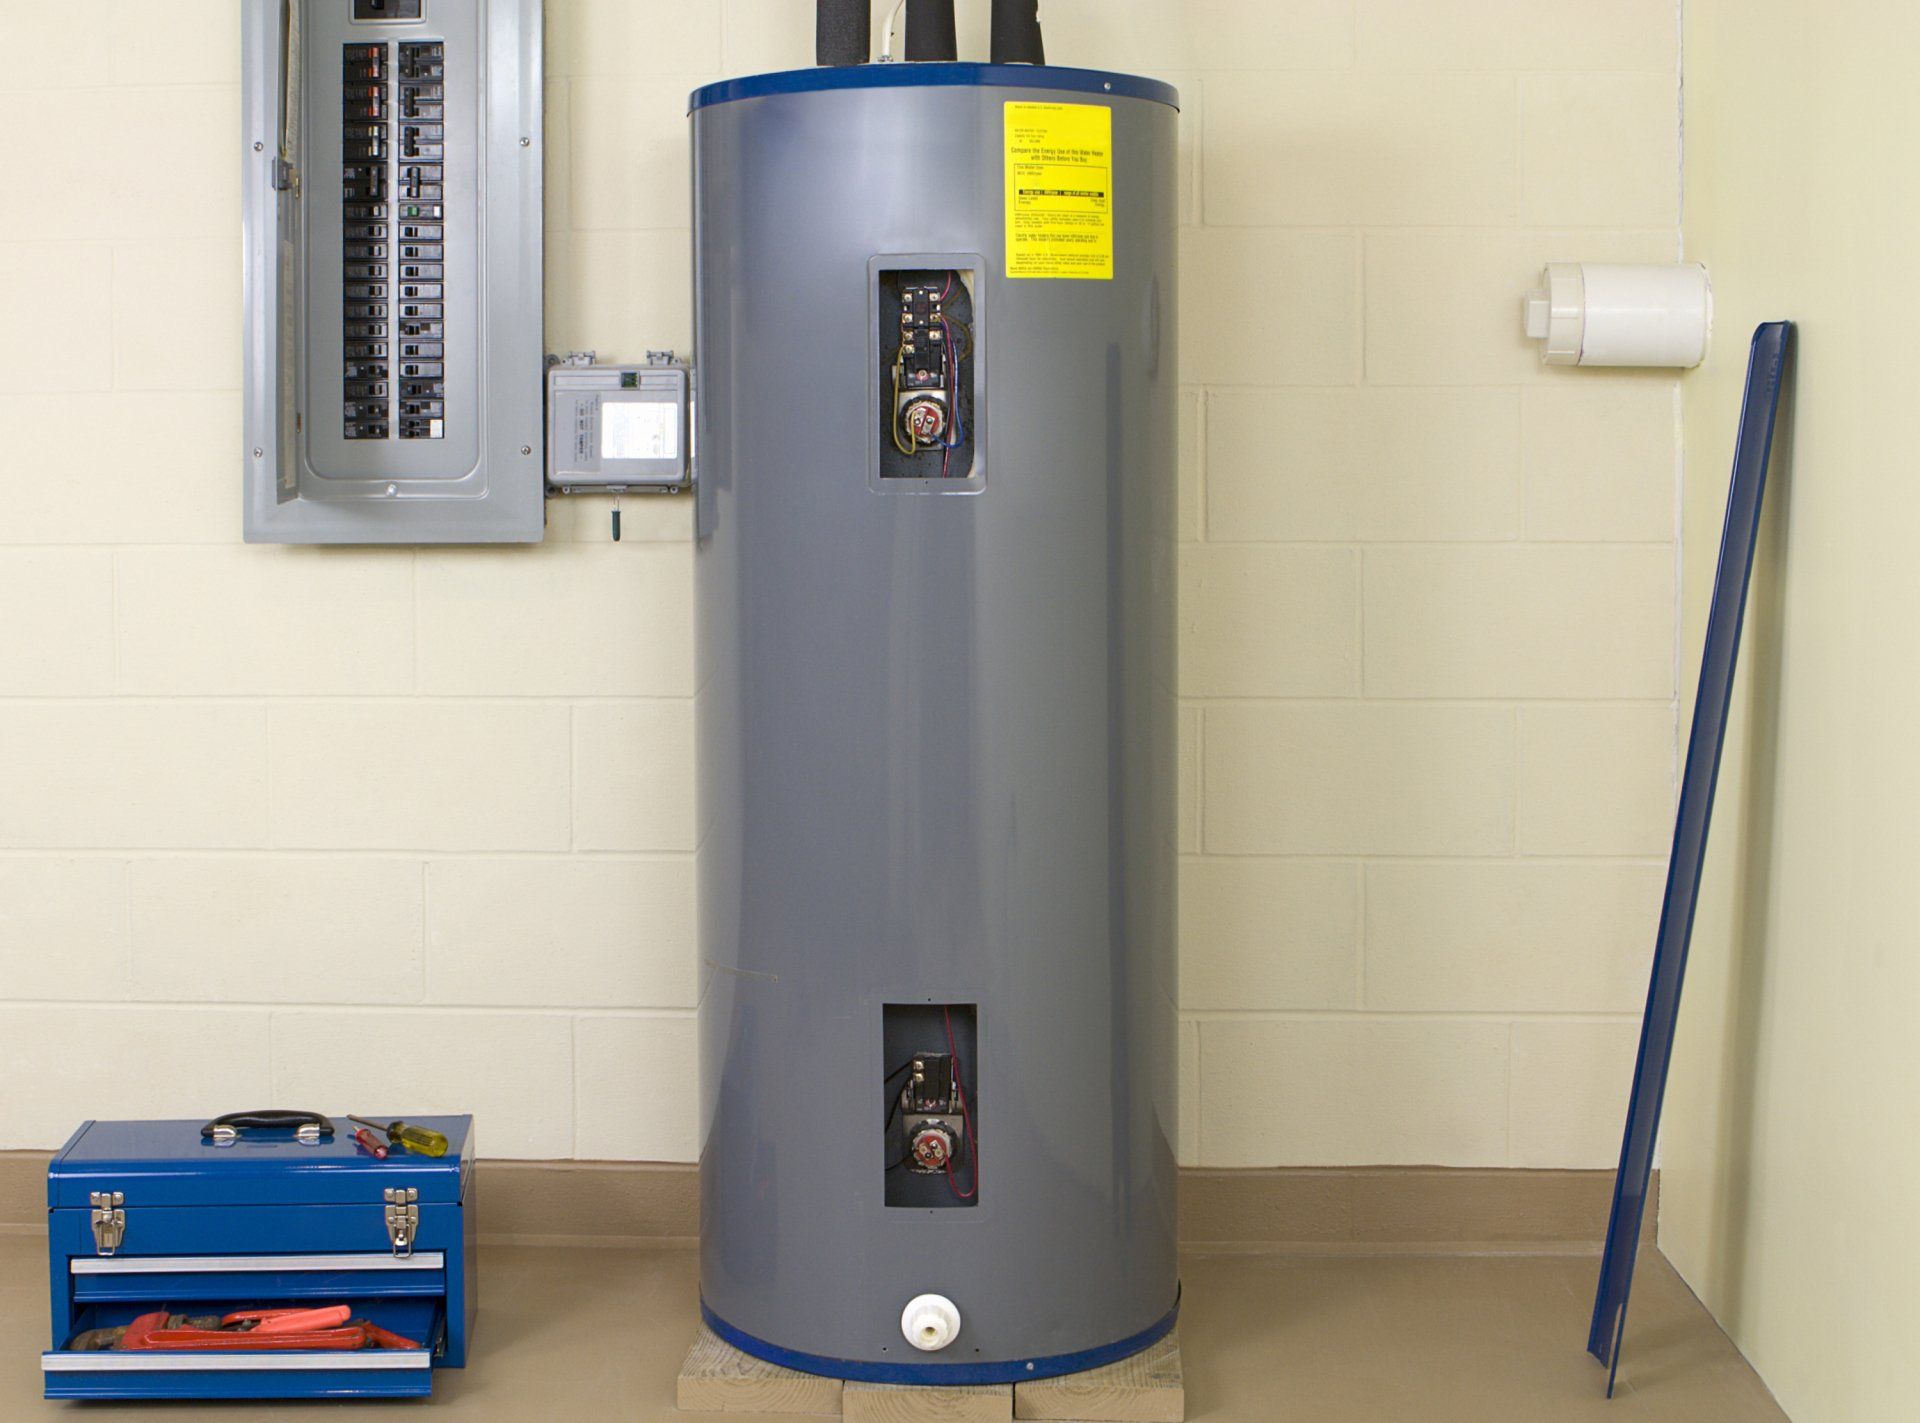 Residential Gas Water Heater | Panama City, FL| Plumbing Services